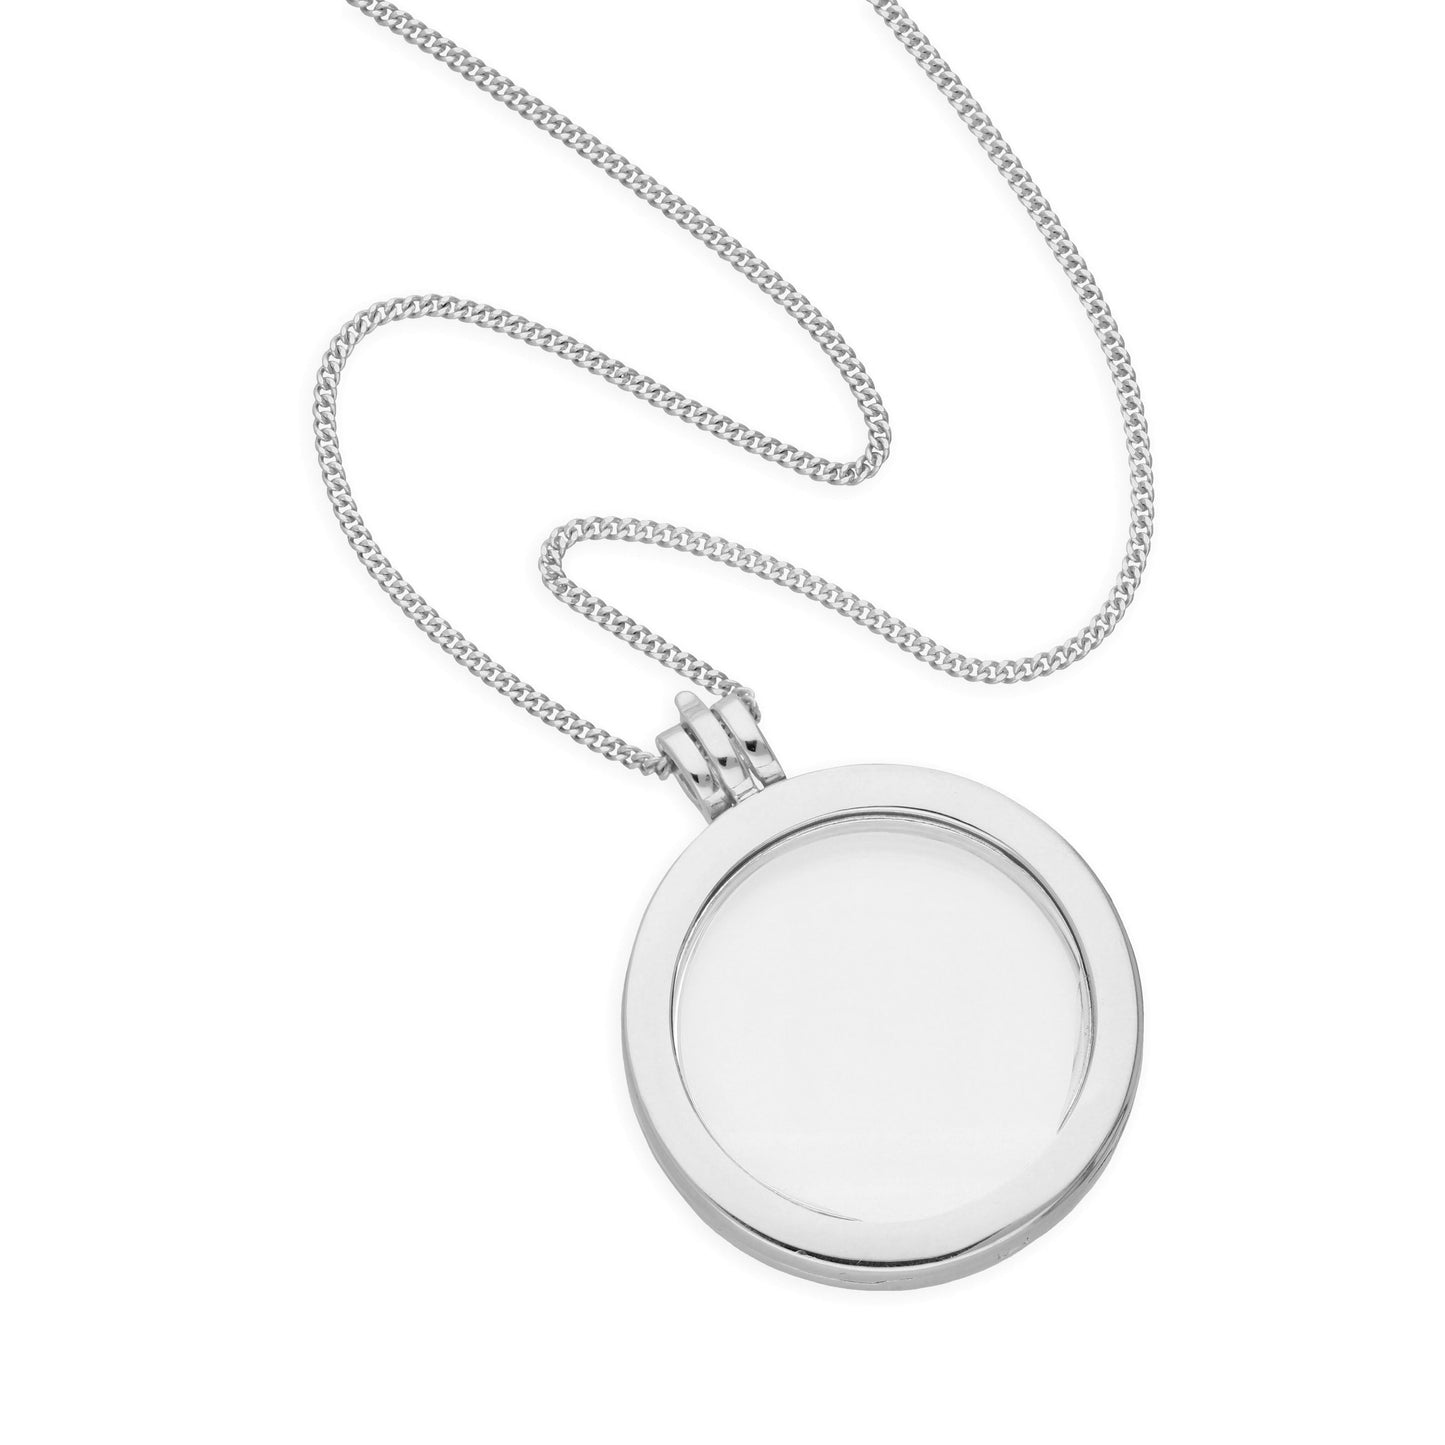 Large Sterling Silver Round Floating Charm Locket on Chain 16 - 24 Inches